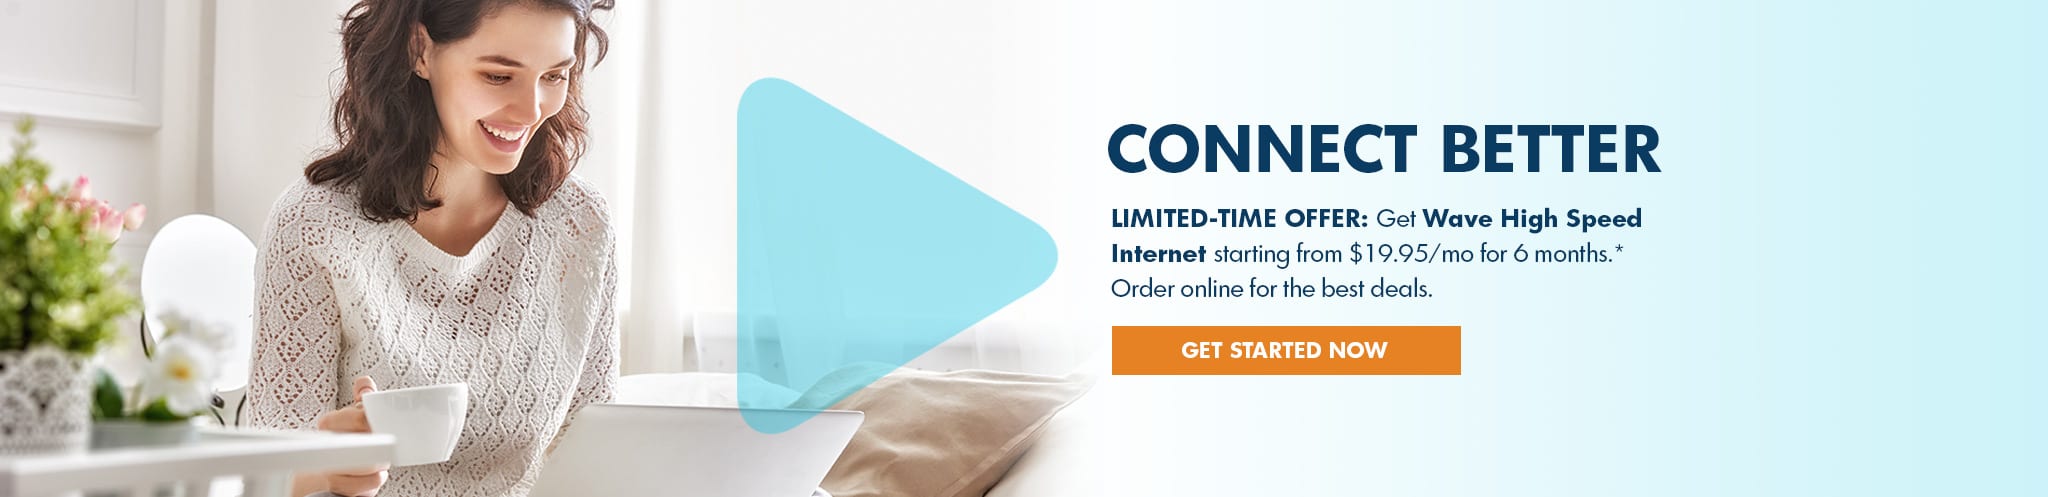 Connect Better with Wave starting from $19.95/month*